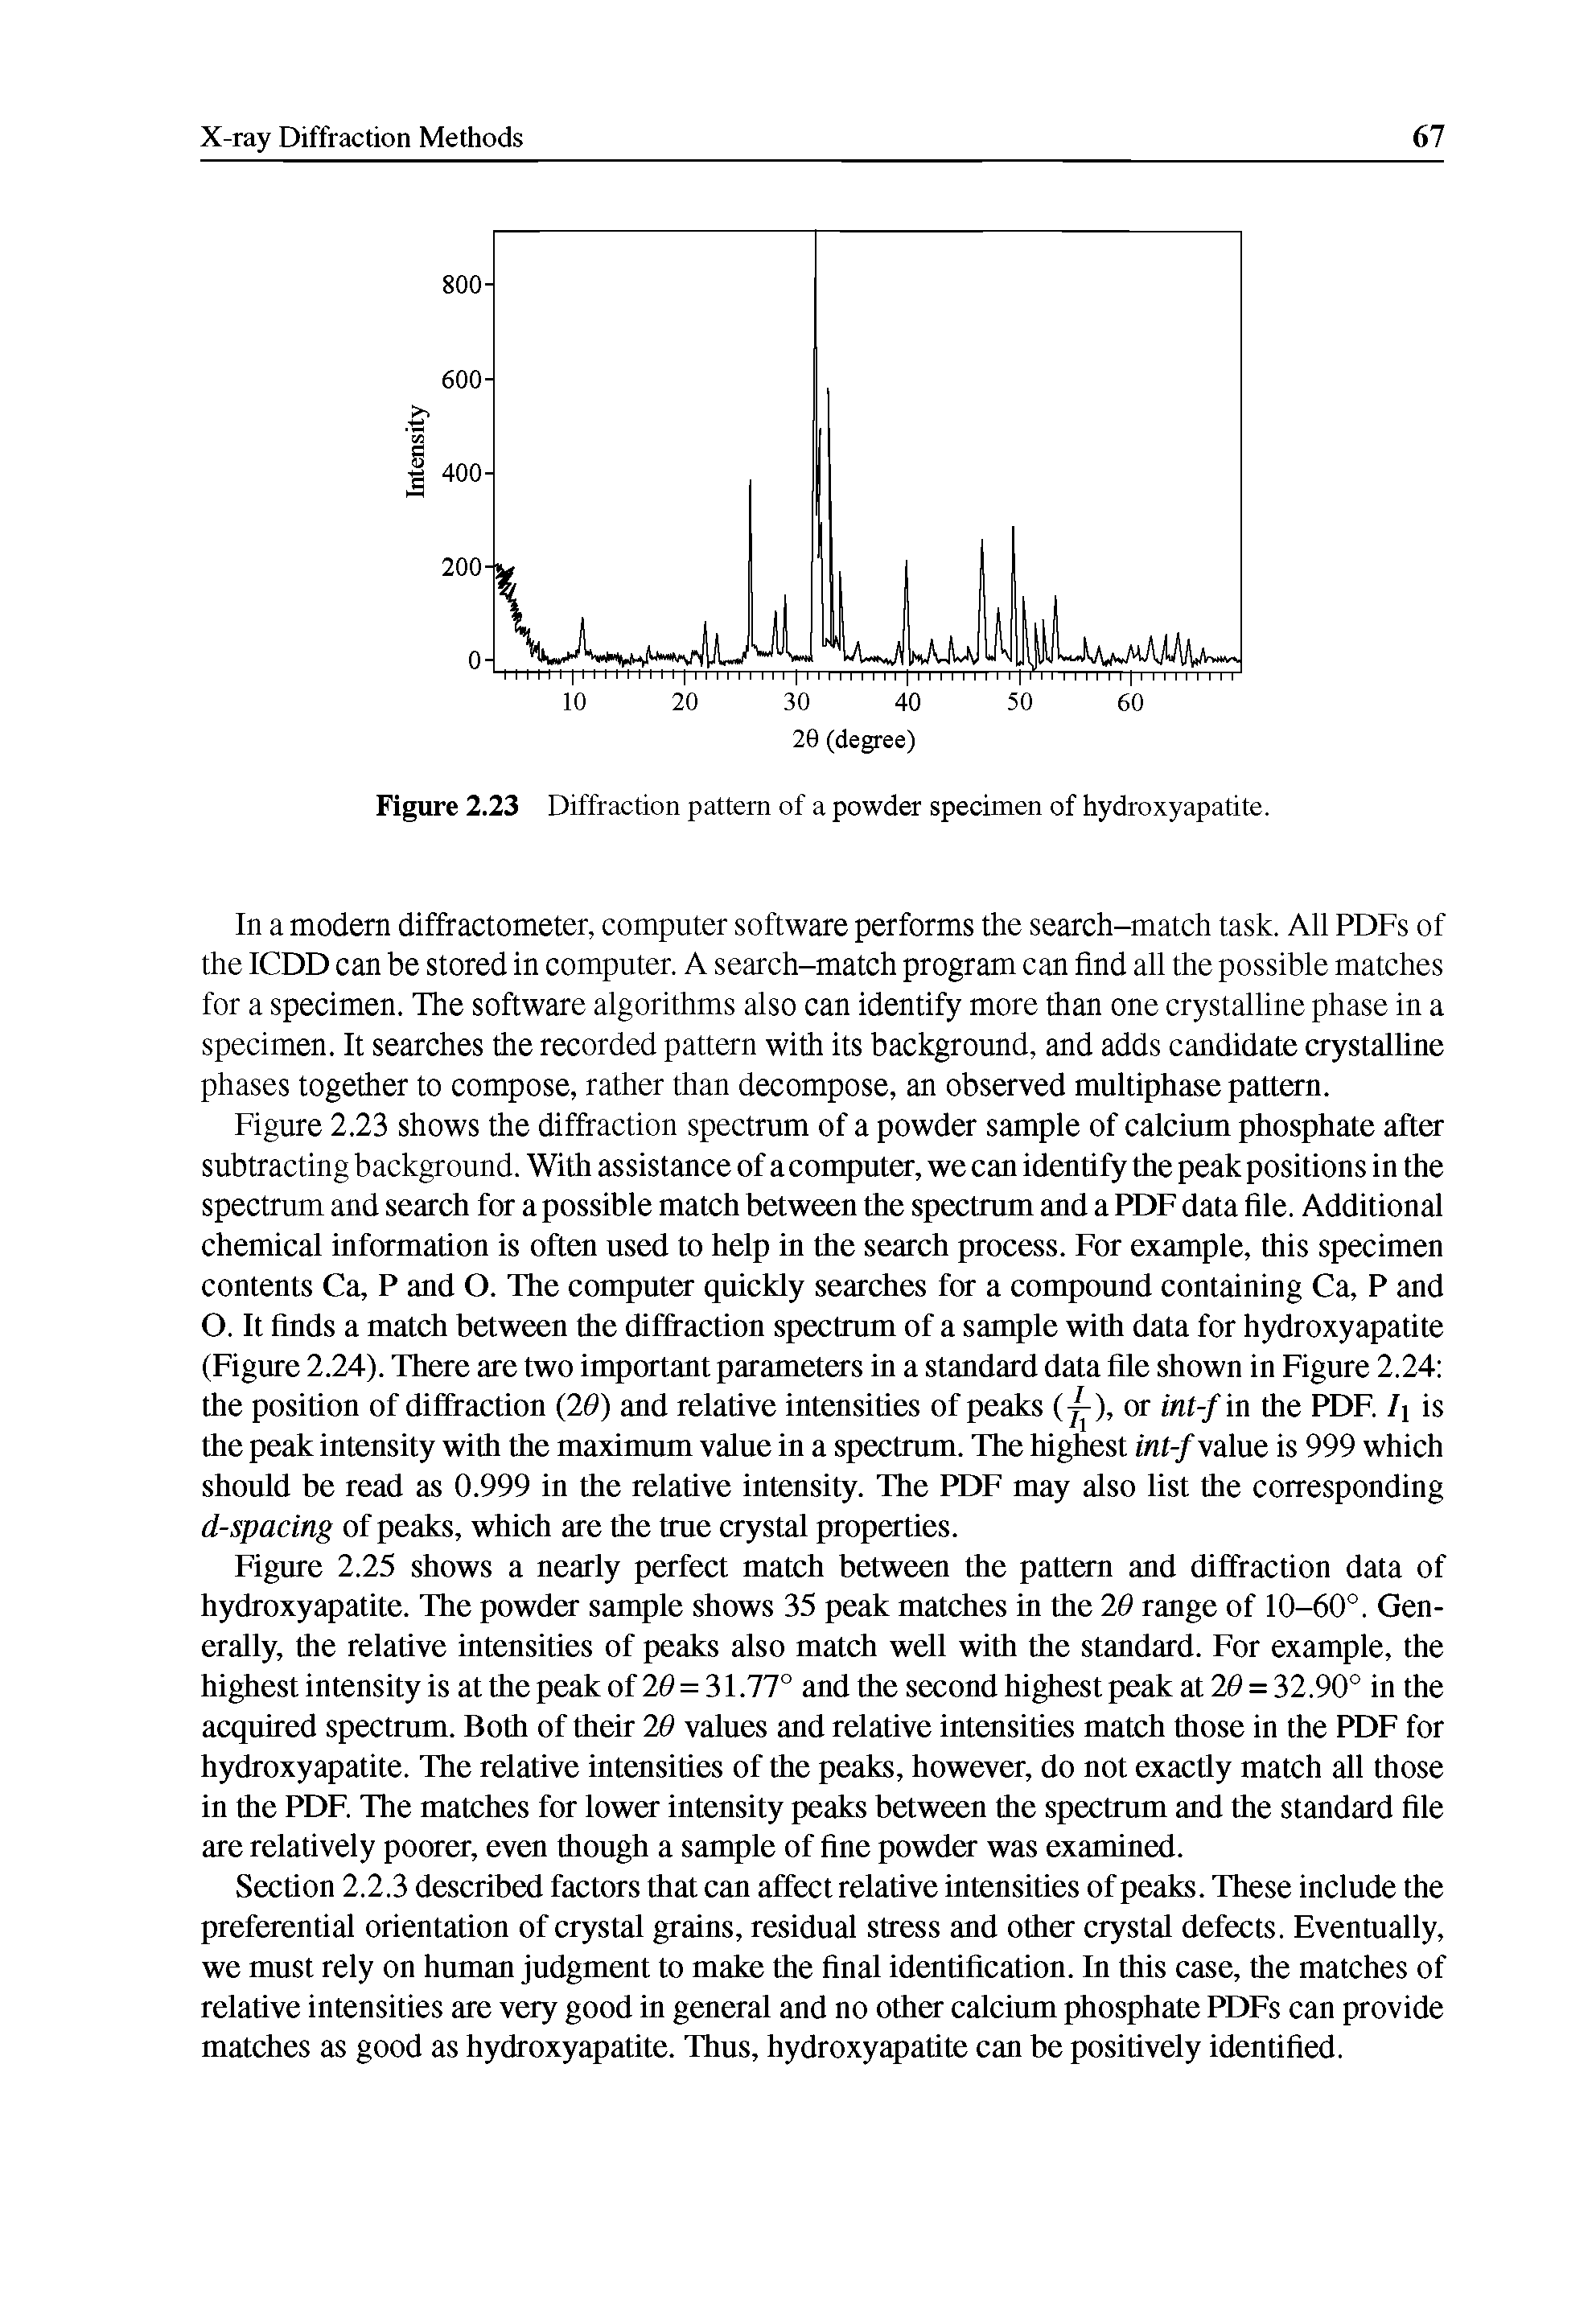 Figure 2.23 shows the diffraction spectrum of a powder sample of calcium phosphate after subtracting background. With assistance of a computer, we can identify the peak positions in the spectrum and search for a possible match between the spectrum and a PDF data file. Additional chemical information is often used to help in the search process. For example, this specimen contents Ca, P and O. The computer quickly searches for a compound containing Ca, P and O. It finds a match between the diffraction spectrum of a sample with data for hydroxyapatite (Figure 2.24). There are two important parameters in a standard data file shown in Figure 2.24 the position of diffraction (20) and relative intensities of peaks (j ), or int-f in the PDF. I is the peak intensity with the maximum value in a spectrum. The highest int-f value is 999 which should be read as 0.999 in the relative intensity. The PDF may also list the corresponding d-spacing of peaks, which are the true crystal properties.